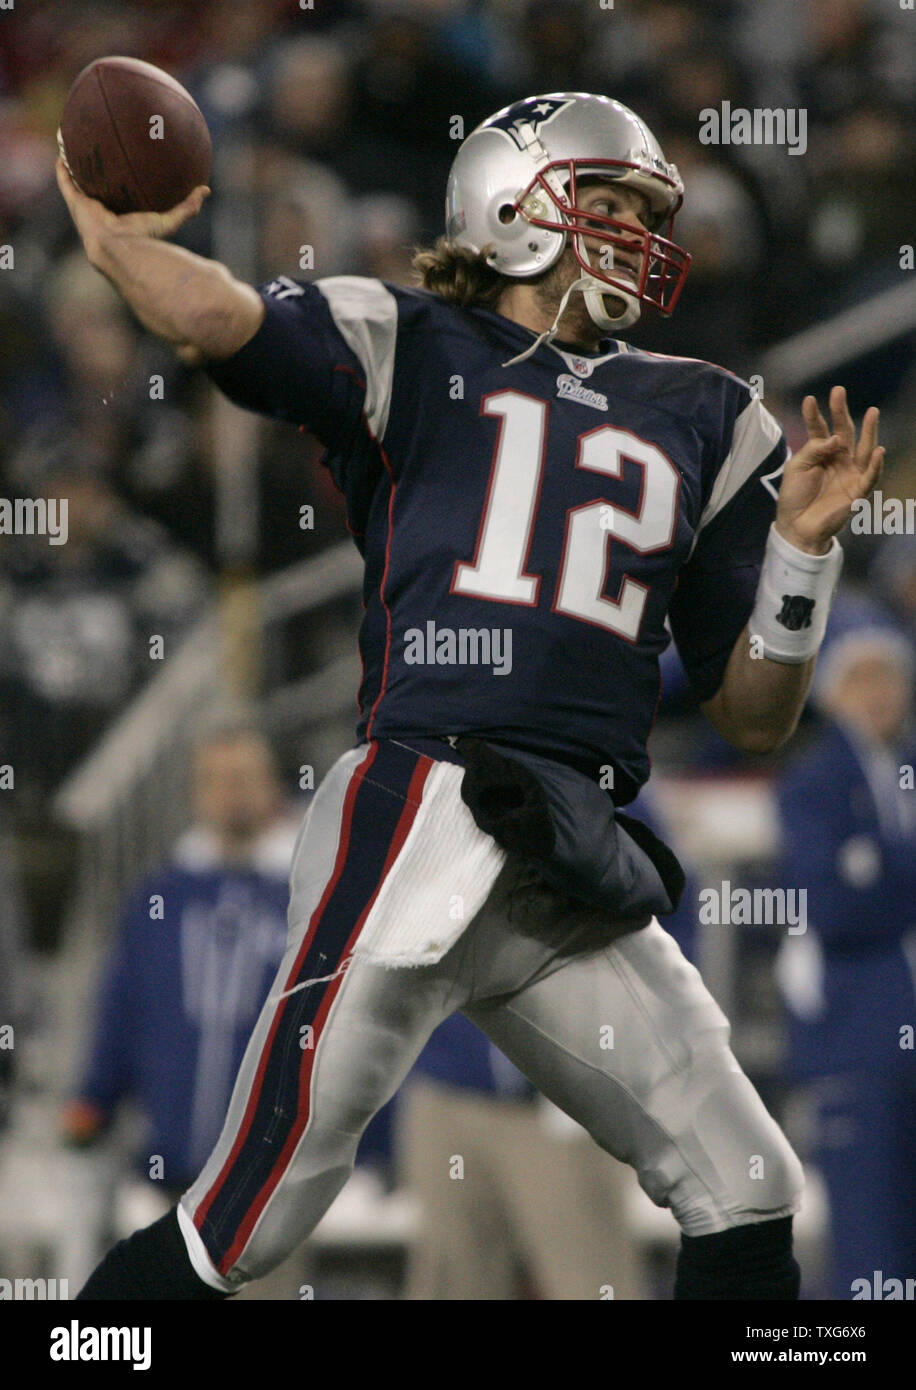 New England Patriots quarterback Tom Brady drops back for a pass in the second quarter against the Indianapolis Colts at Gillette Stadium in Foxboro, Massachusetts on November 21, 2010.    UPI/Matthew Healey Stock Photo